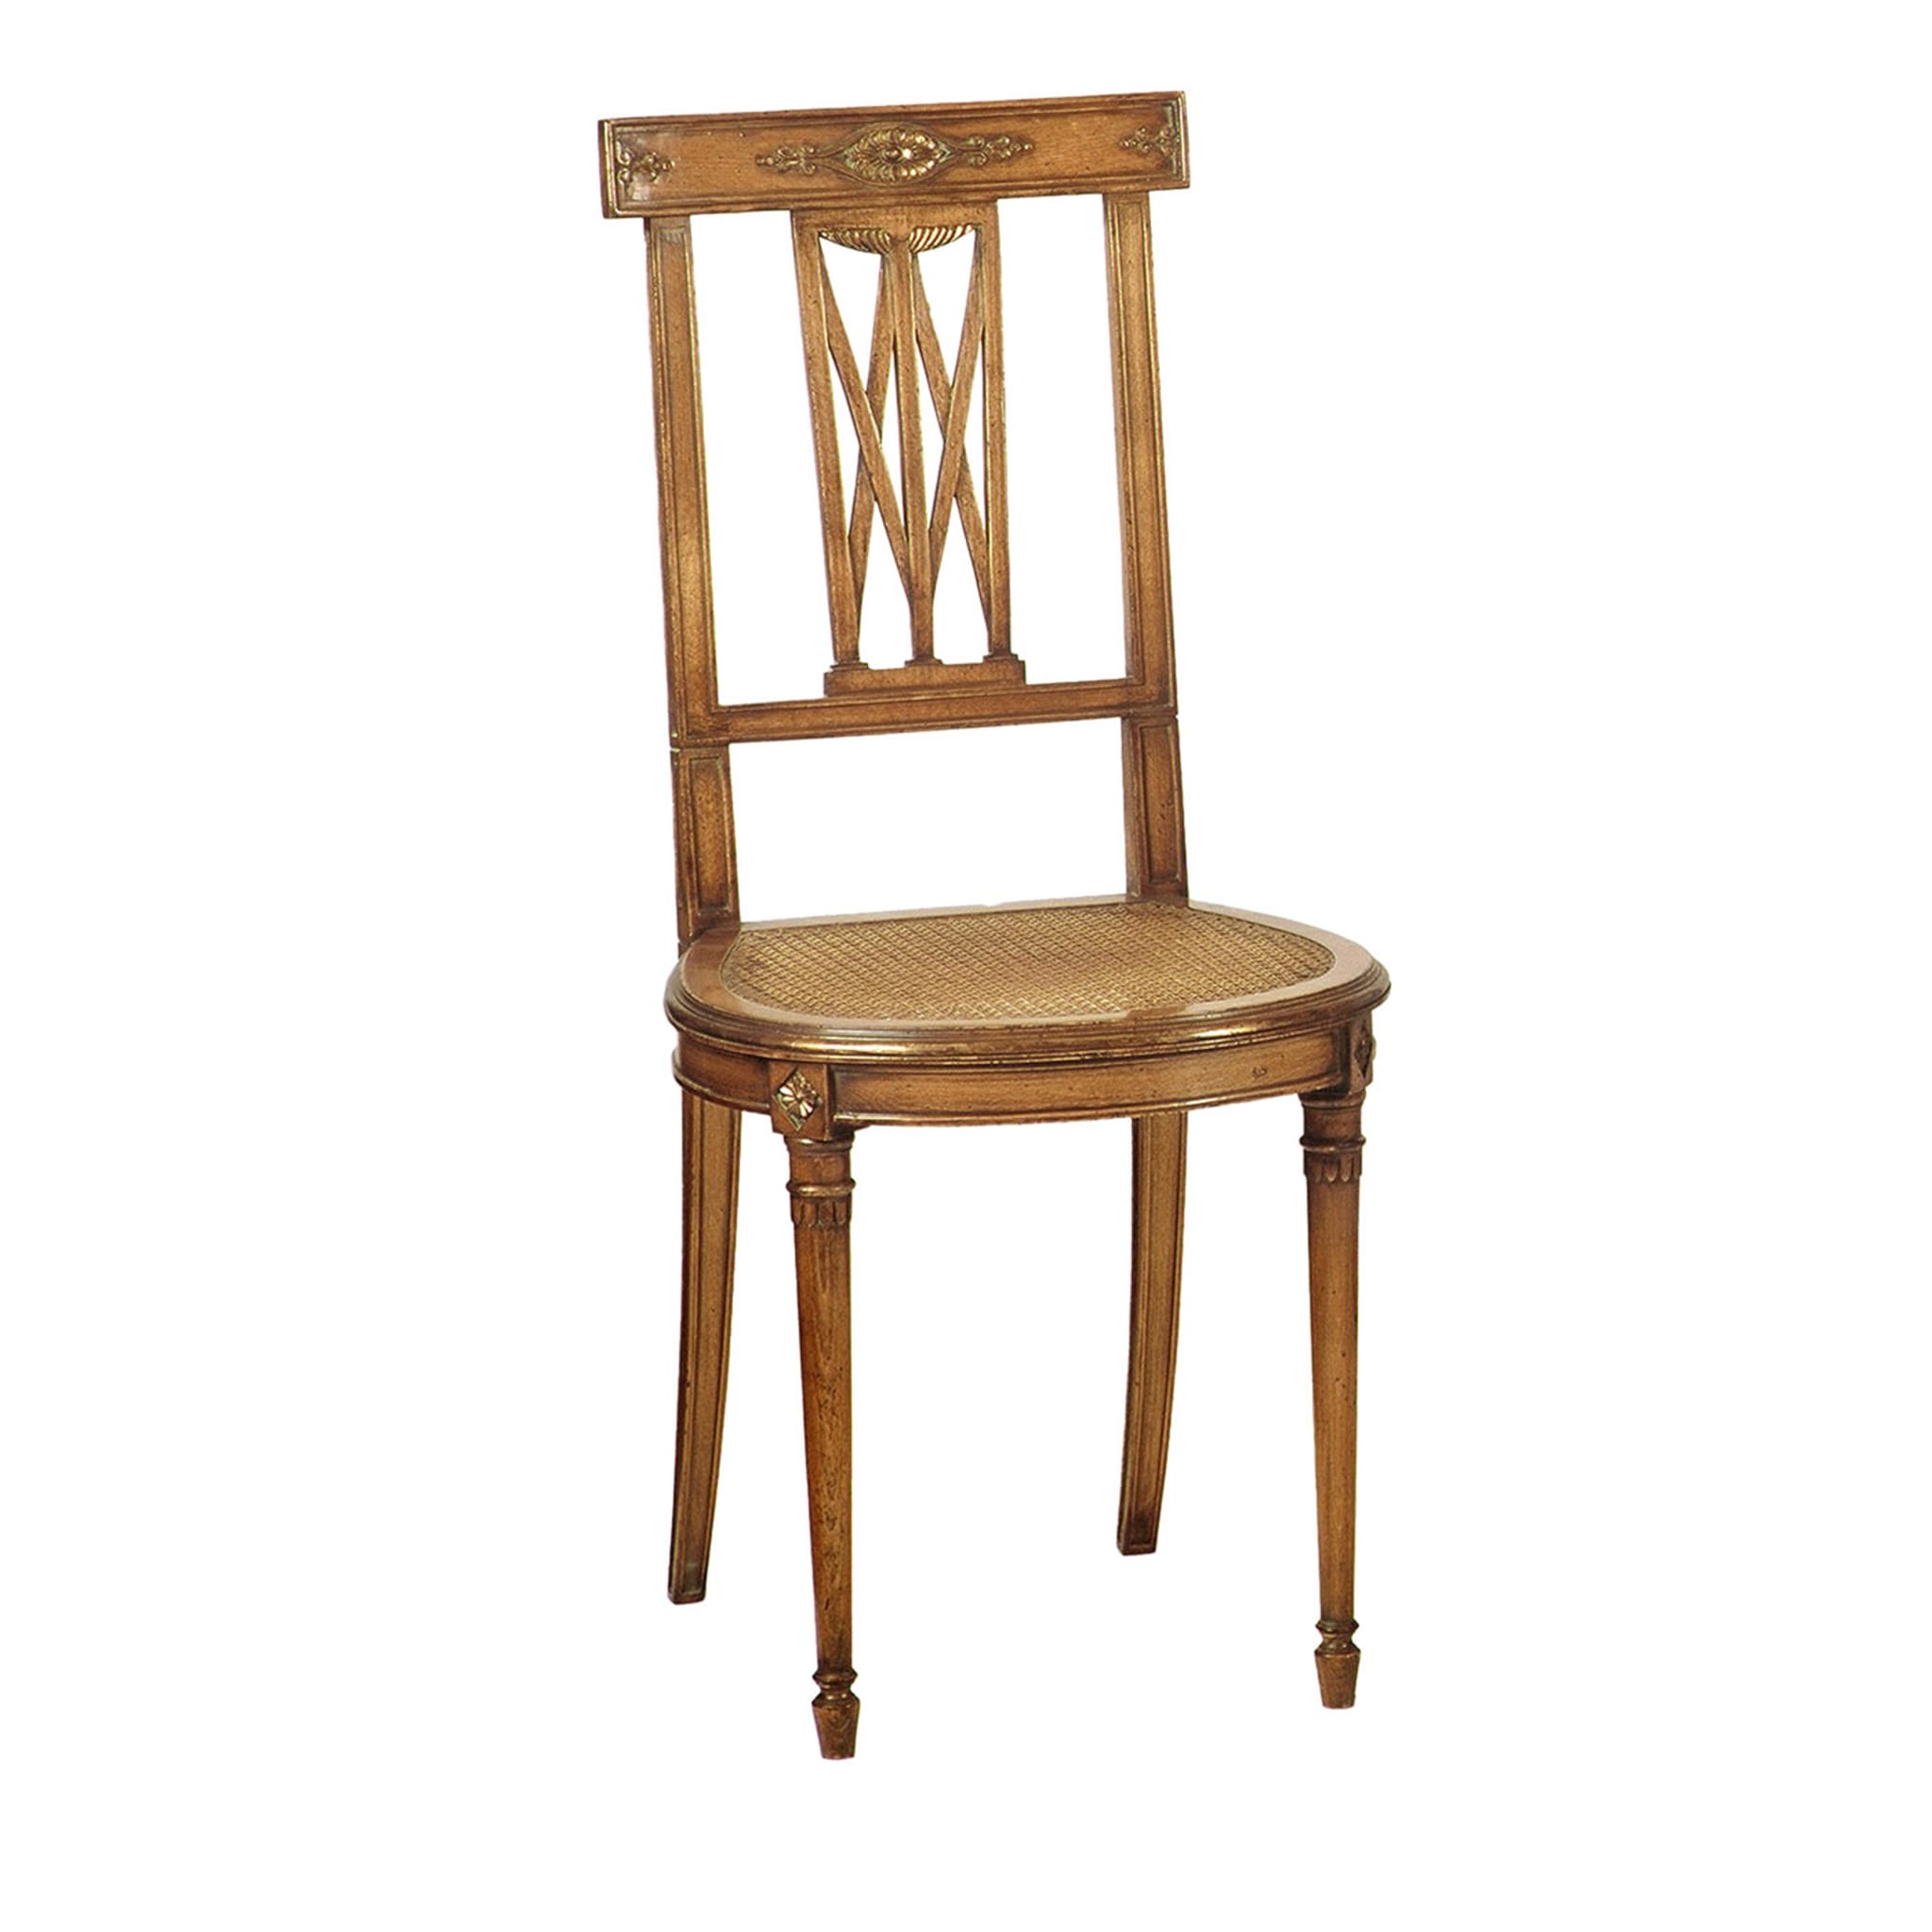 French Empire-Style Beech Chair - Main view